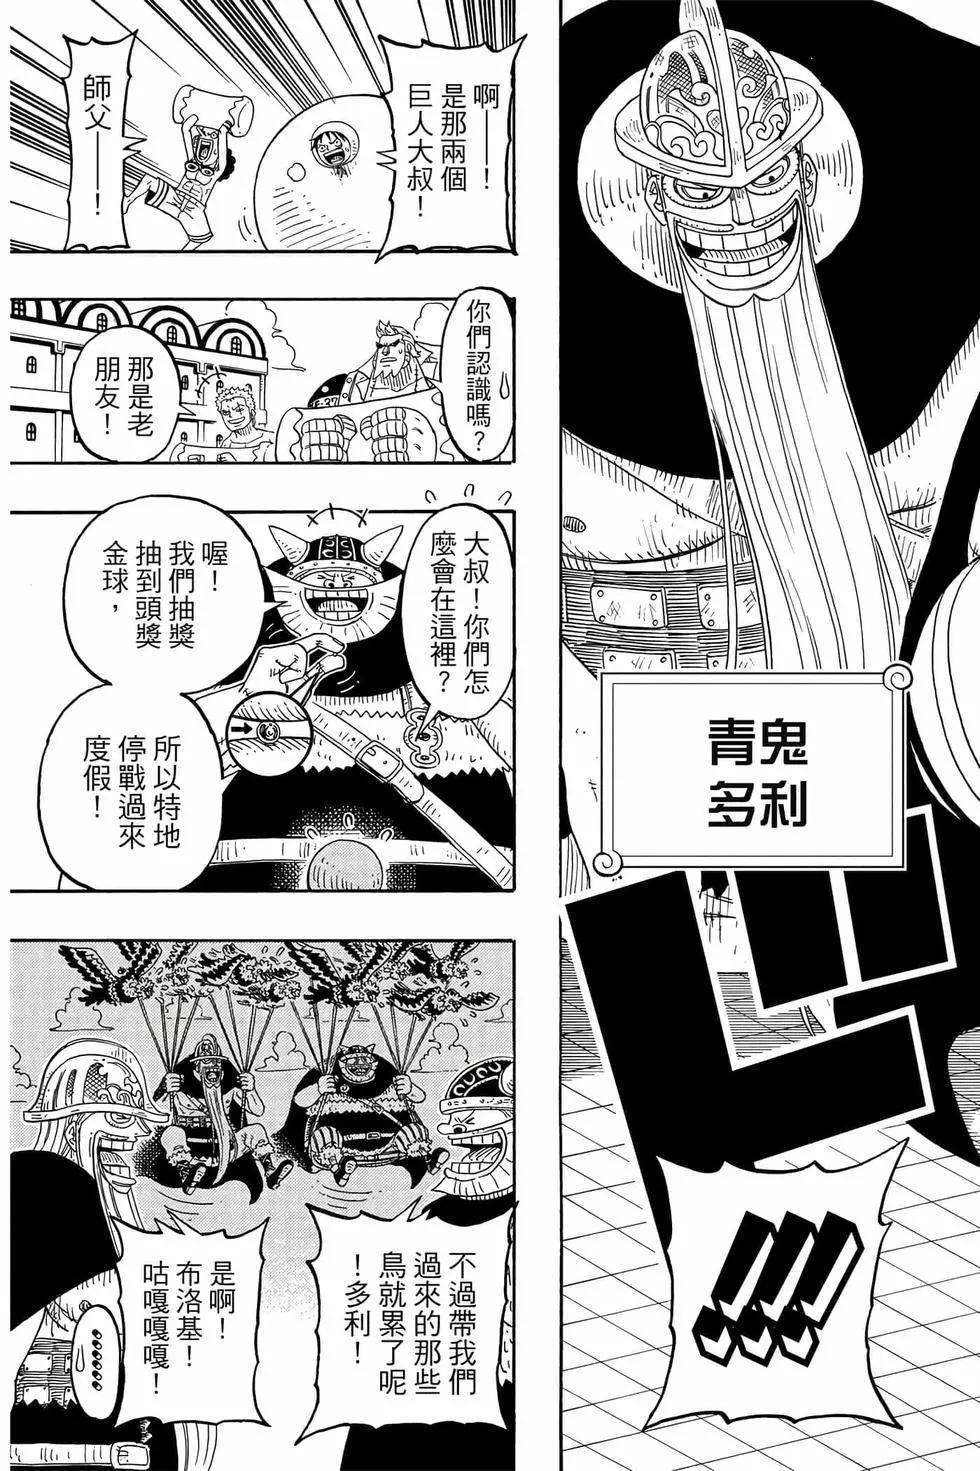 One piece party - 第04卷(2/4) - 4